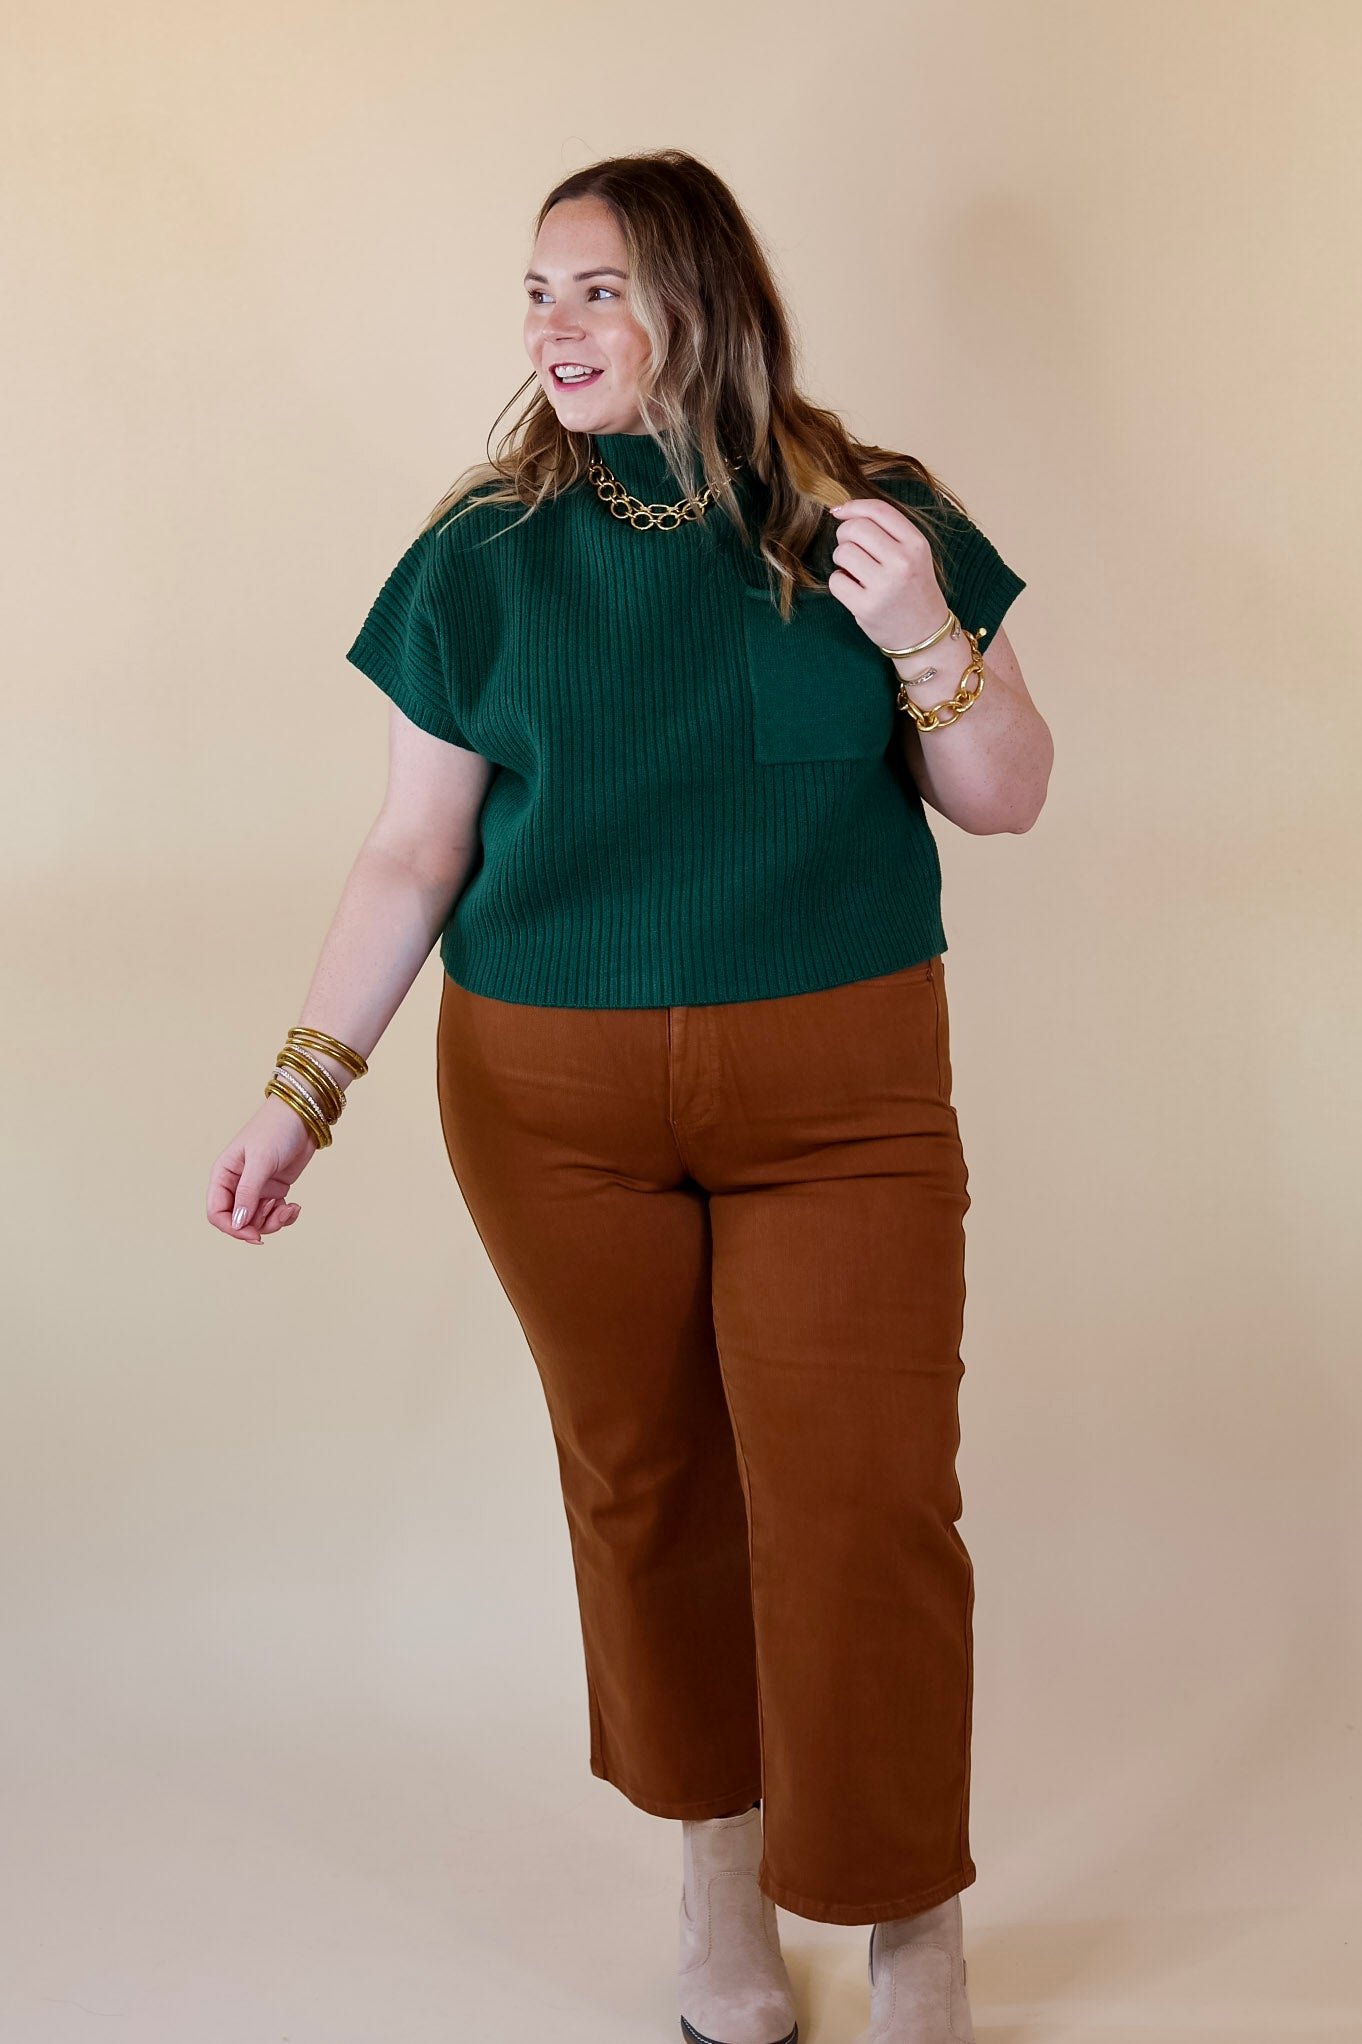 City Sights Cap Sleeve Sweater Top in Hunter Green - Giddy Up Glamour Boutique